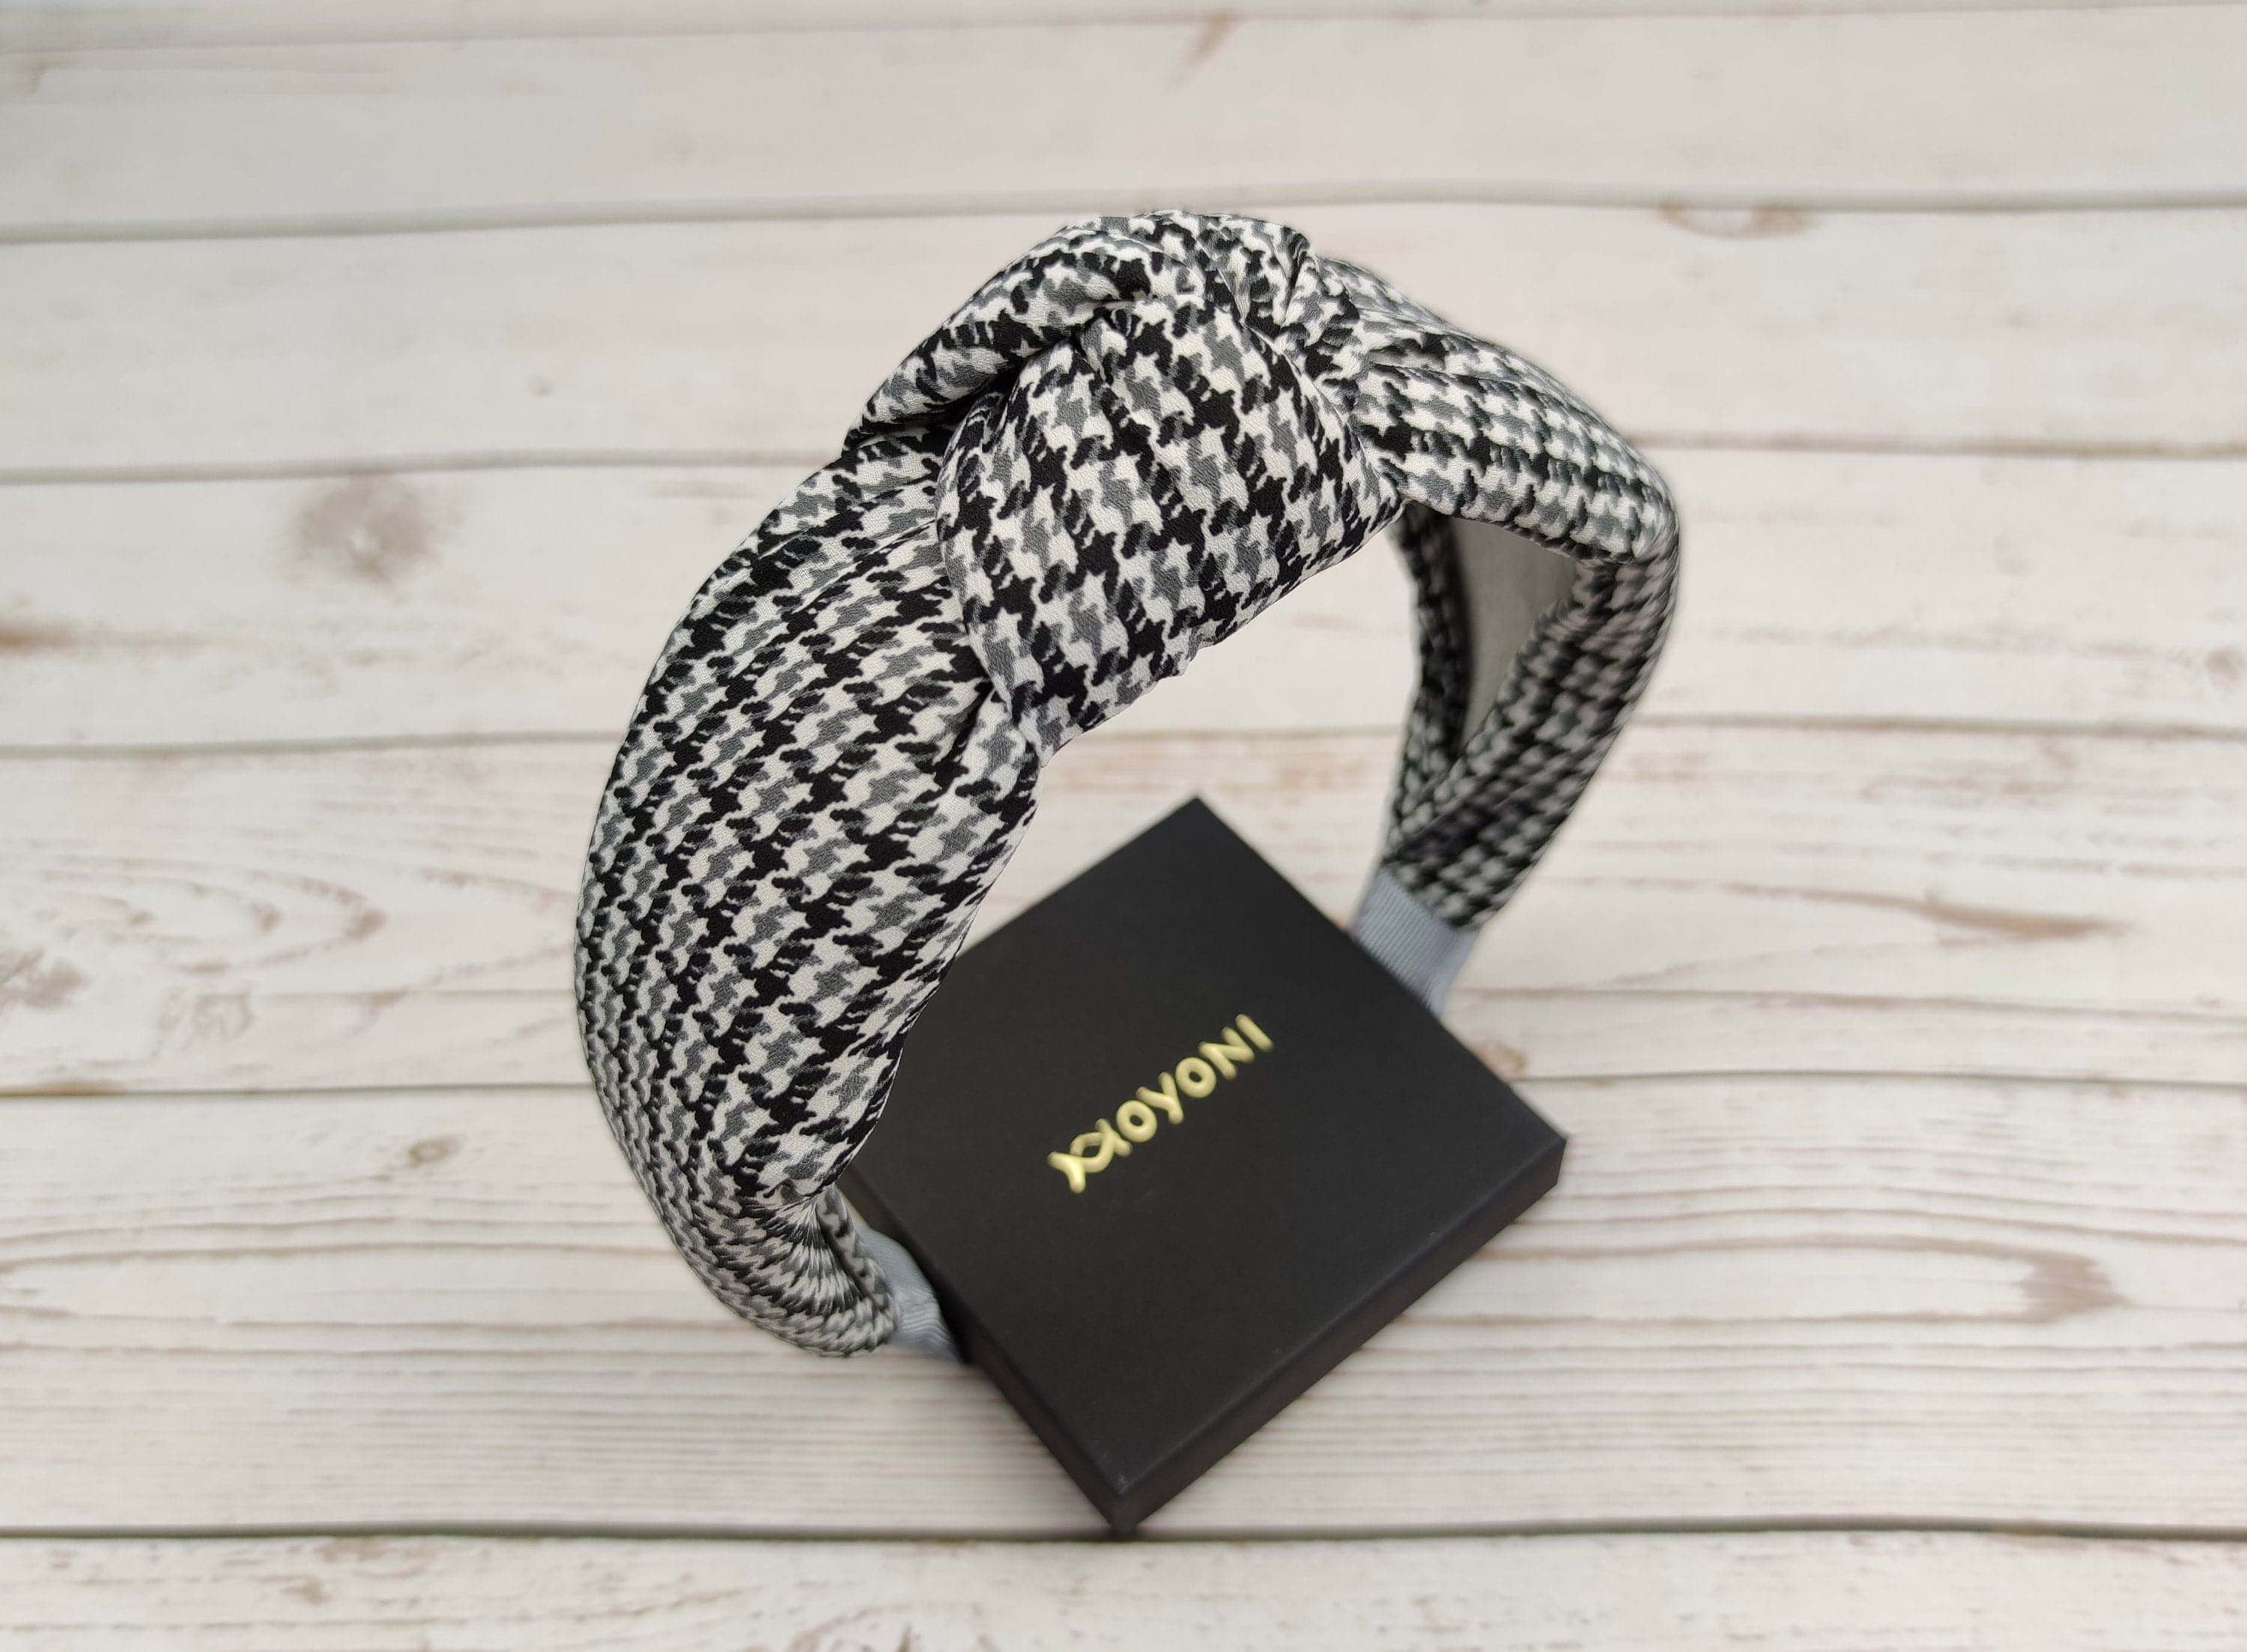 Whether you are looking for a twisted headband to add a little flair to your outfit or a wide headband to cover more hair, Crepe has you covered!